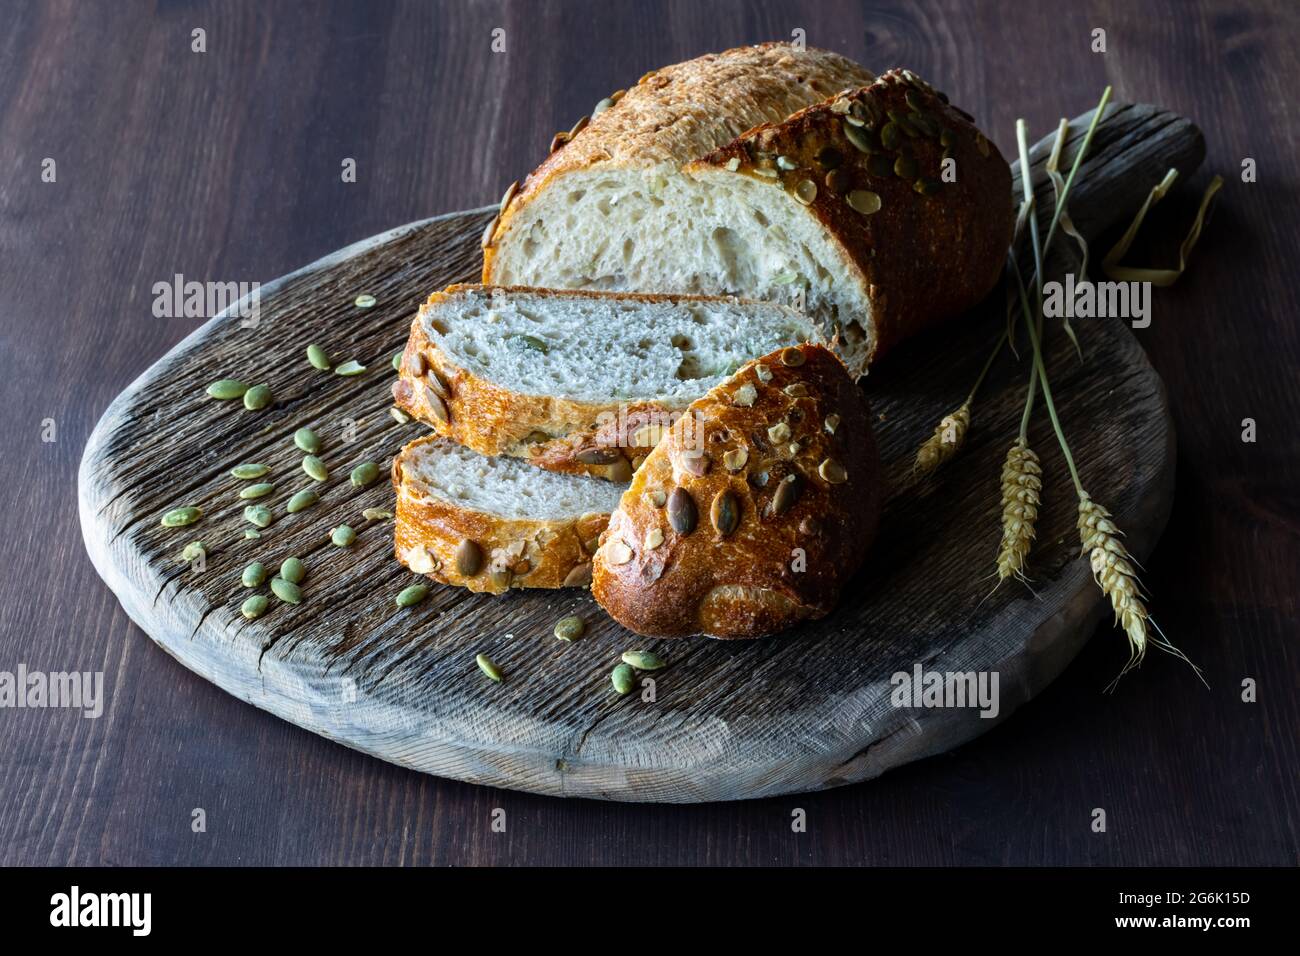 Close up view of a loaf of pumpkin seed bread sliced into on a wooden board, against a dark background. Stock Photo